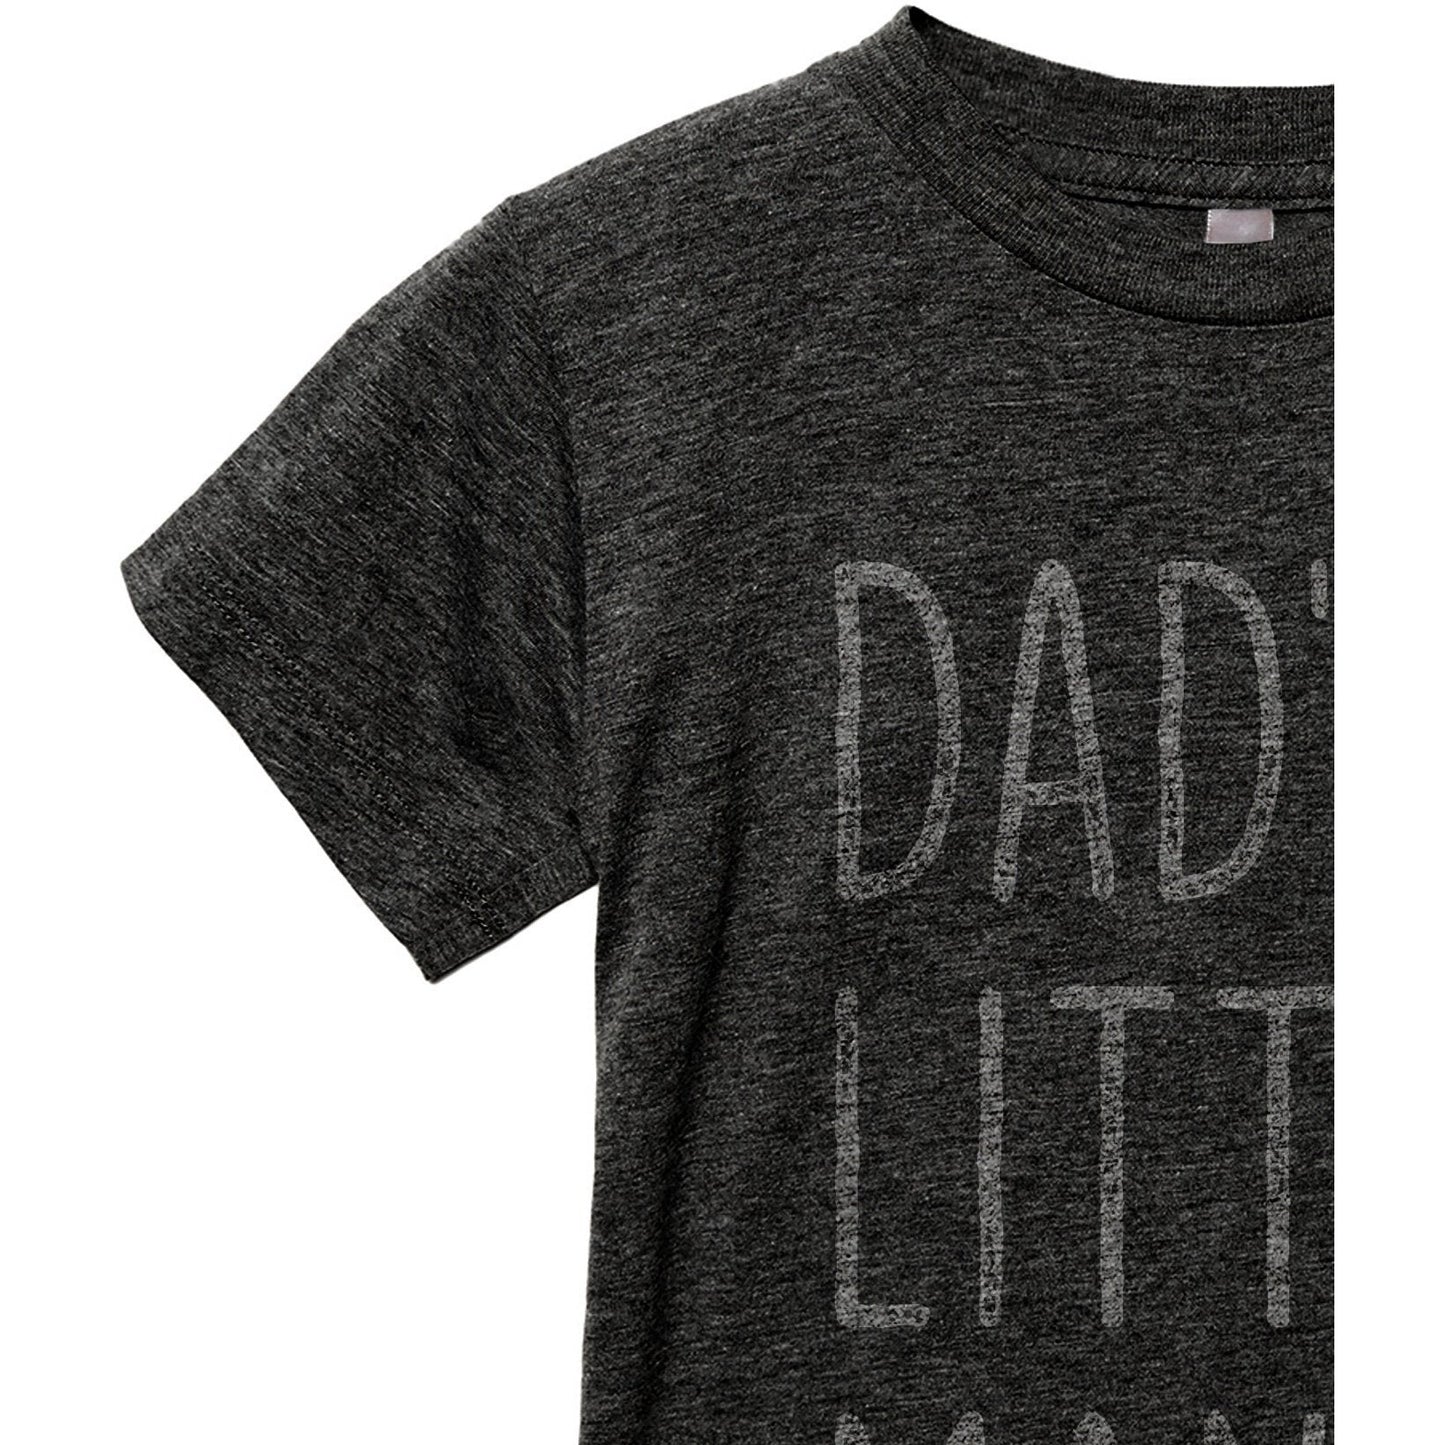 Dad's Little Man Toddler's Go-To Crewneck Tee Heather Grey Close Up Sleeves Collar Details
